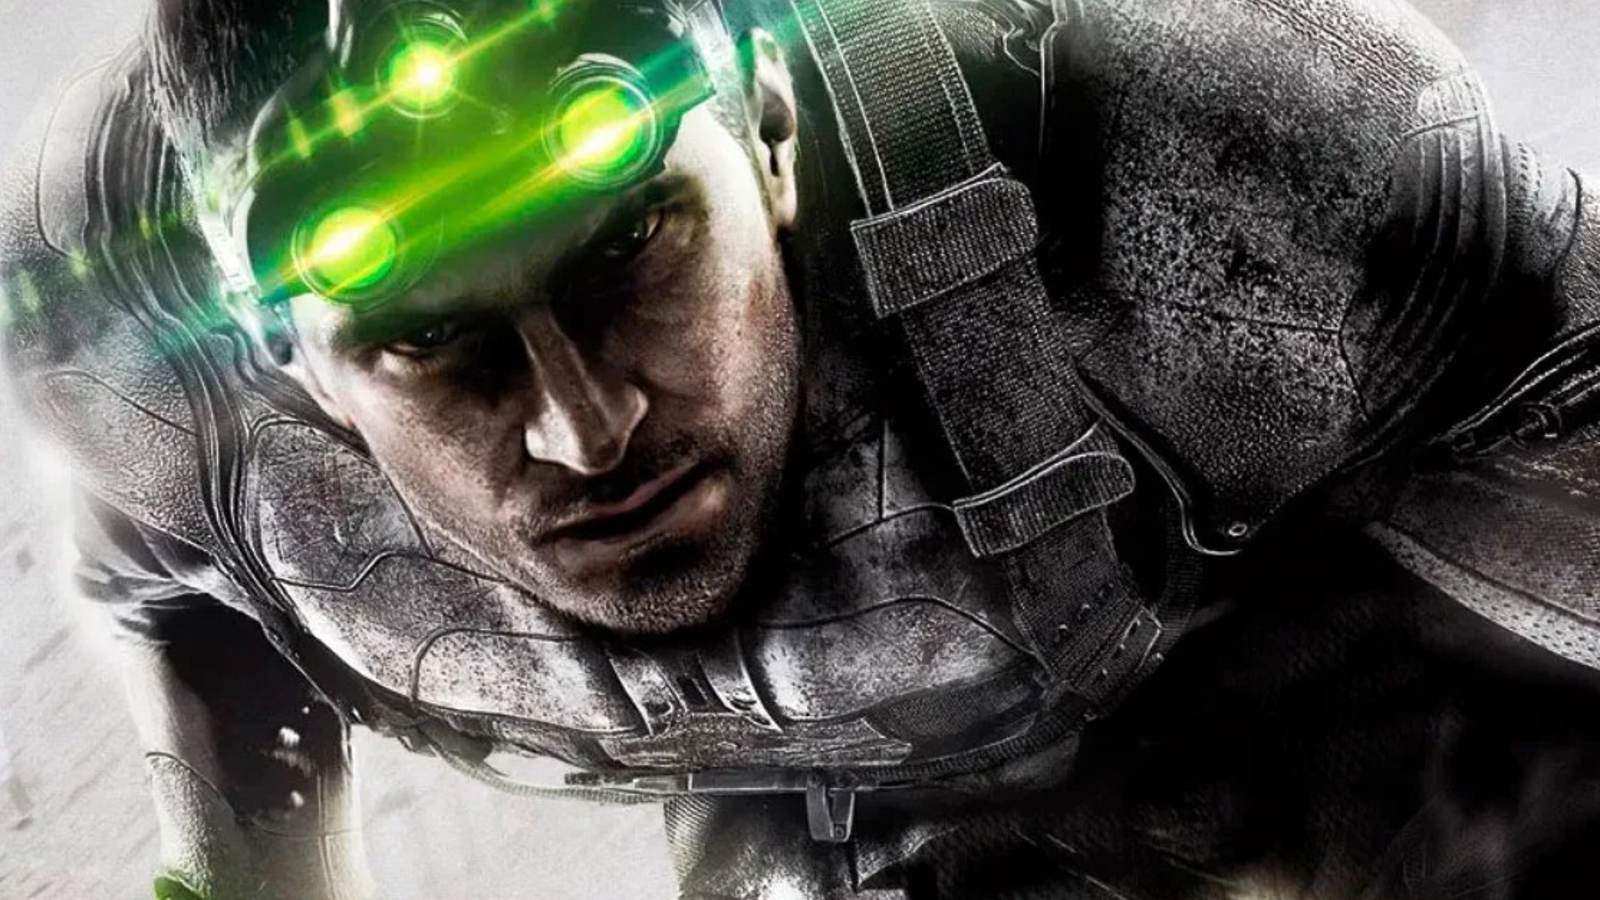 Job Listing Reveals Story For The 'Splinter Cell' Remake Will Be